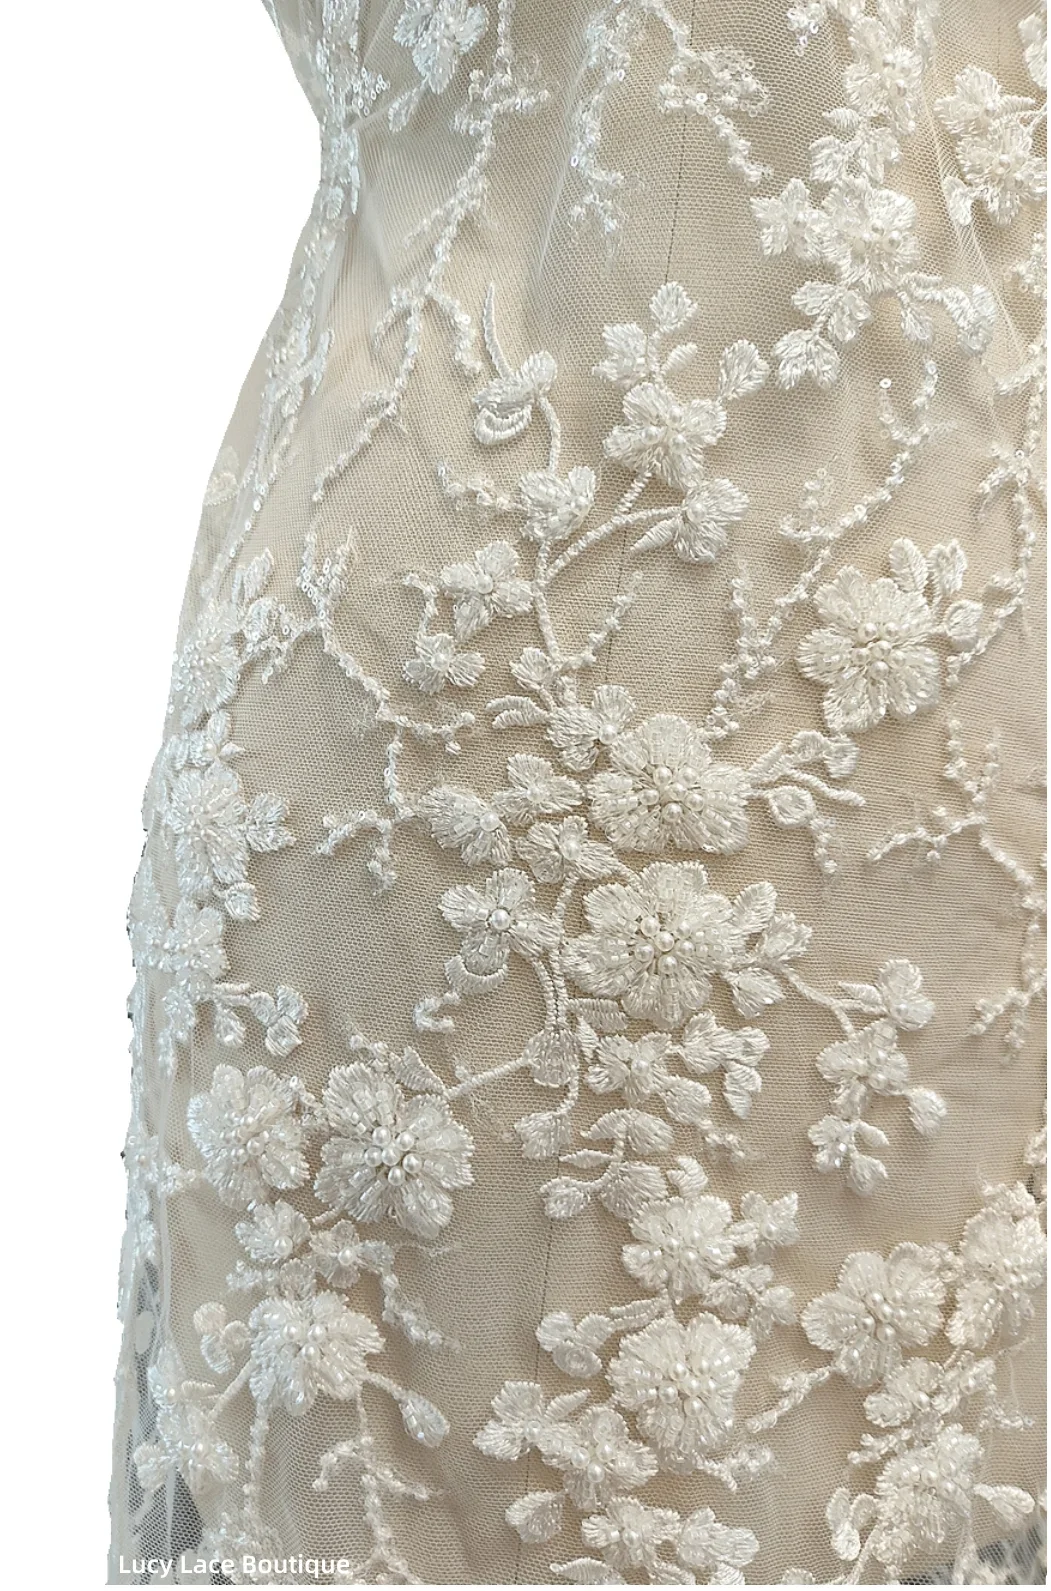 

2023 High Quality Lace 5 yards Wedding Lace GOOD 130CM Wide Ivory Color Embroidery Rayon Material Tulle Lace Fabric